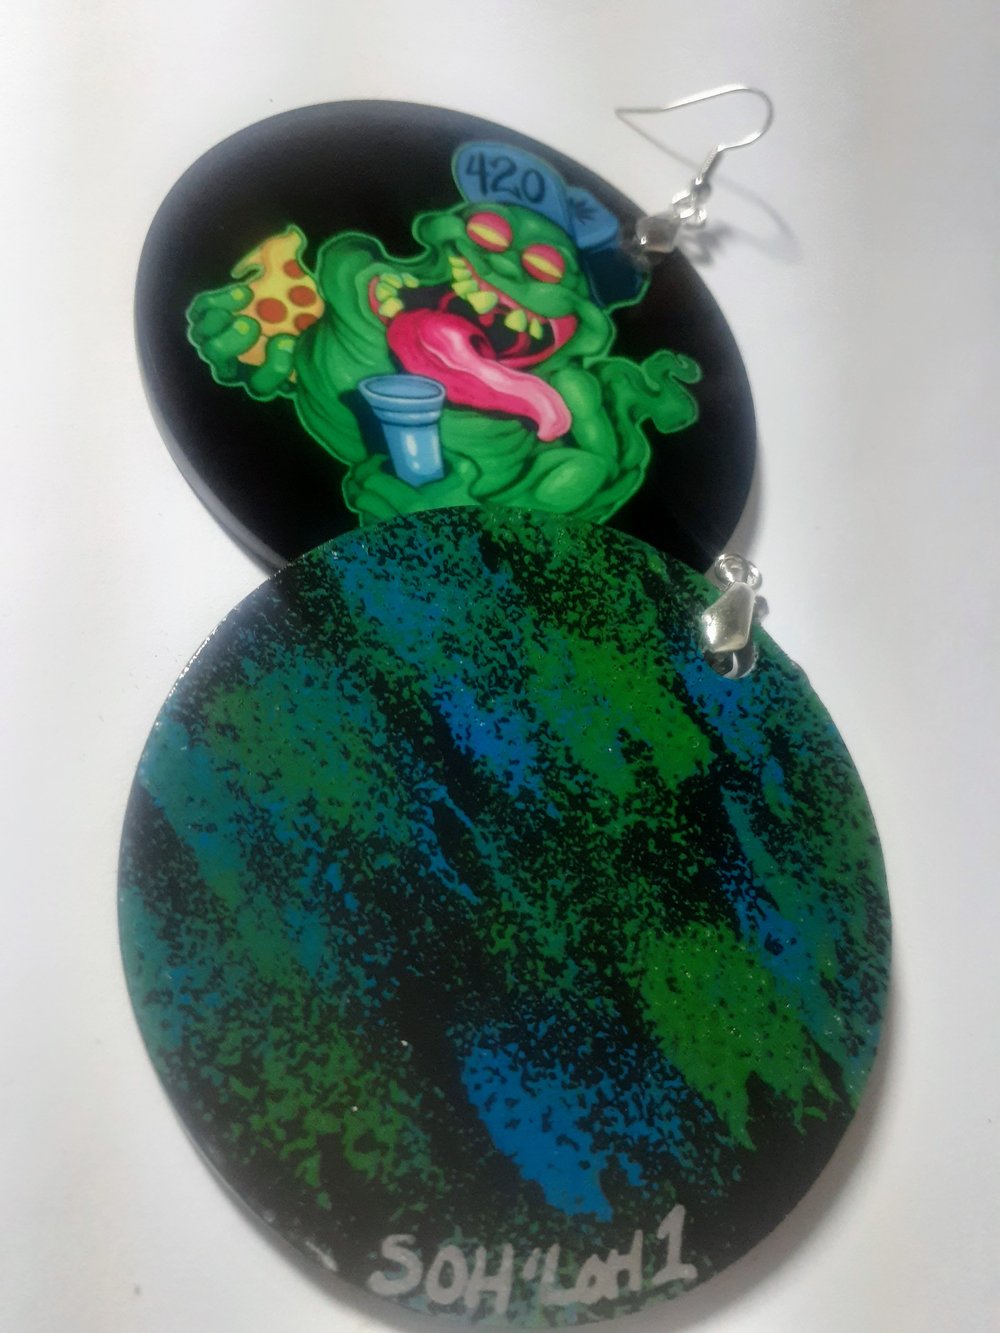 Image of Munchie Ghost, 420, Sublimation, Hand made, Statement earrings